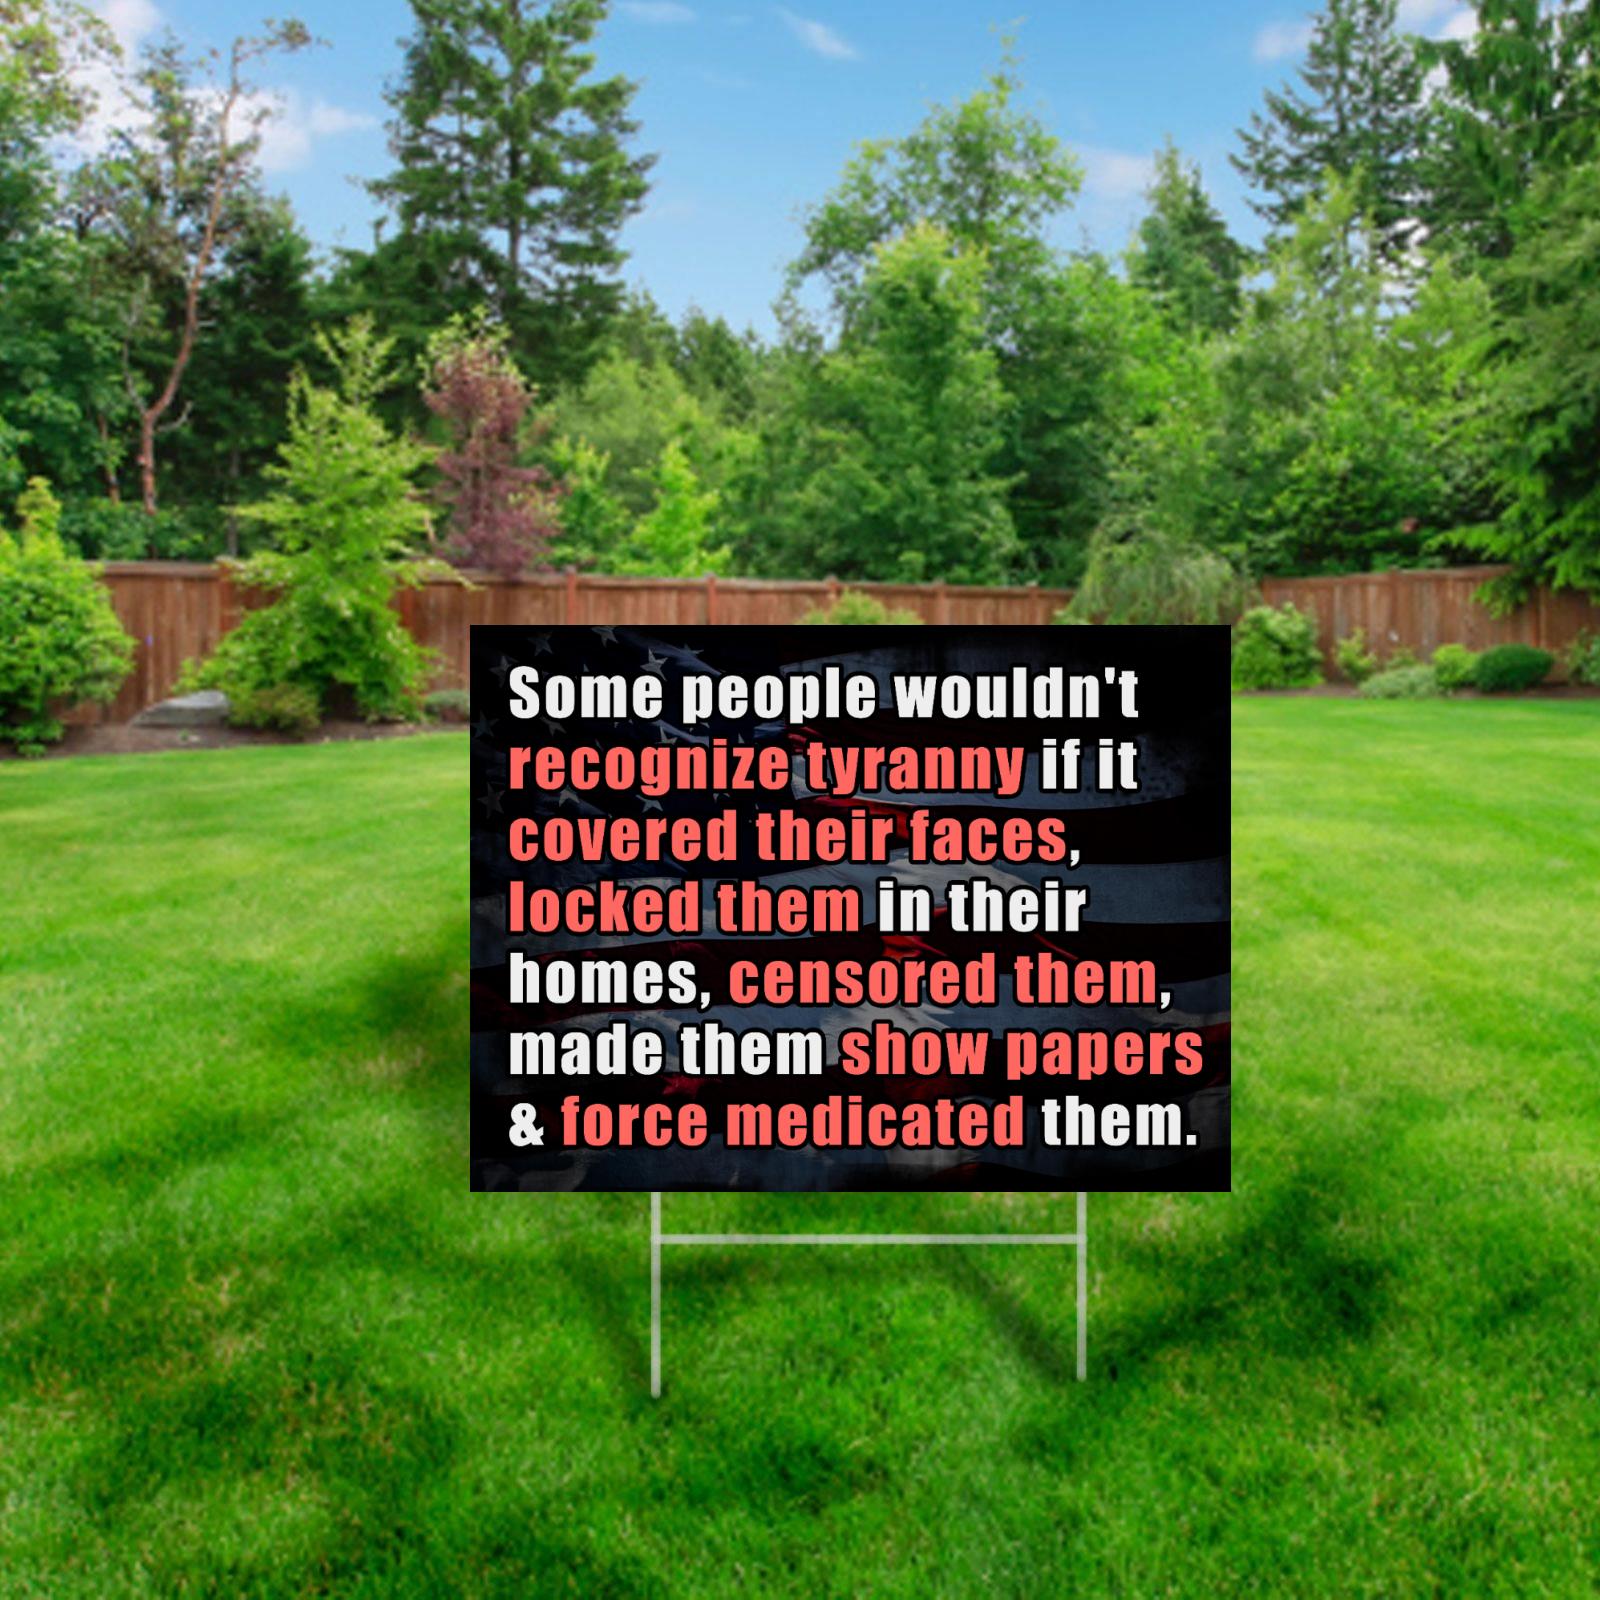 Some People Wouldn't Recognize Tyranny | One-sided Yard Sign - Rise of The New Media